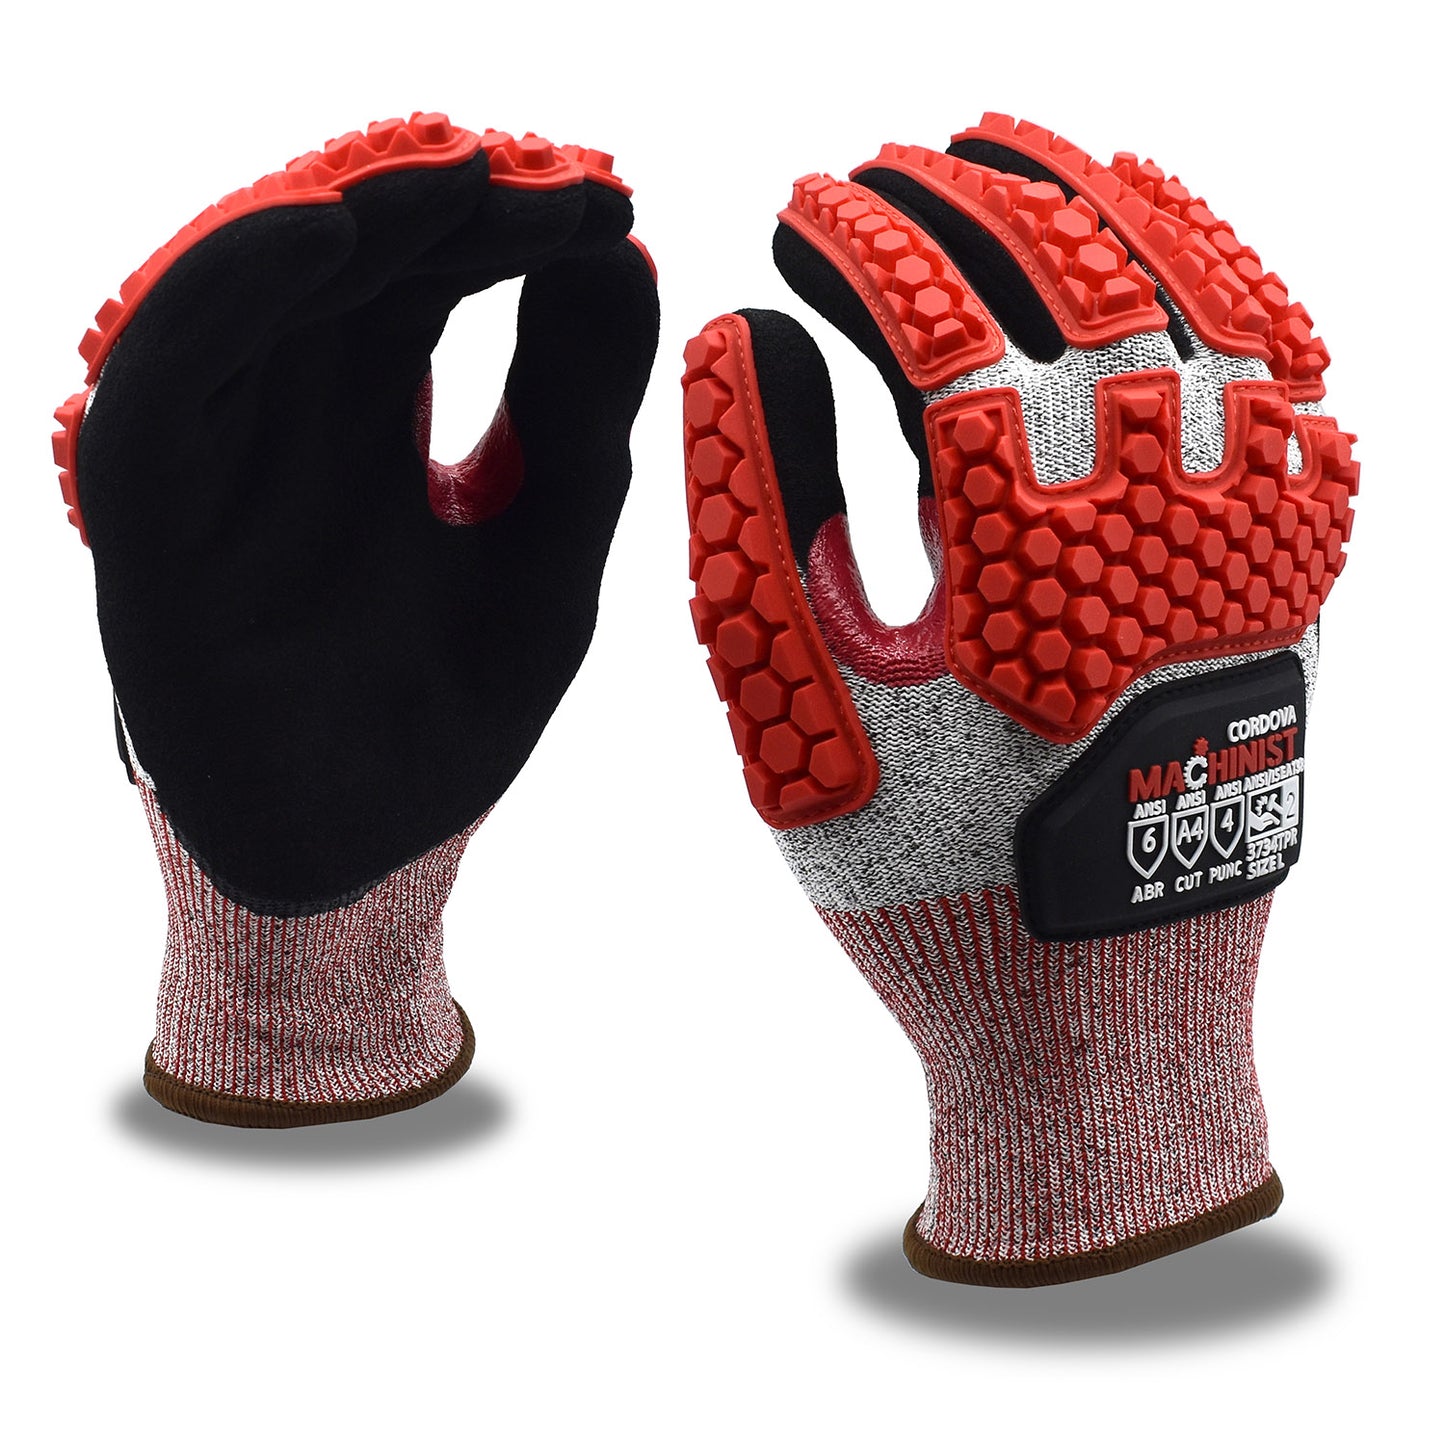 Cut-Resistant Gloves with TPR Protectors, ANSI Cut Level A4, Sandy Nitrile Coat